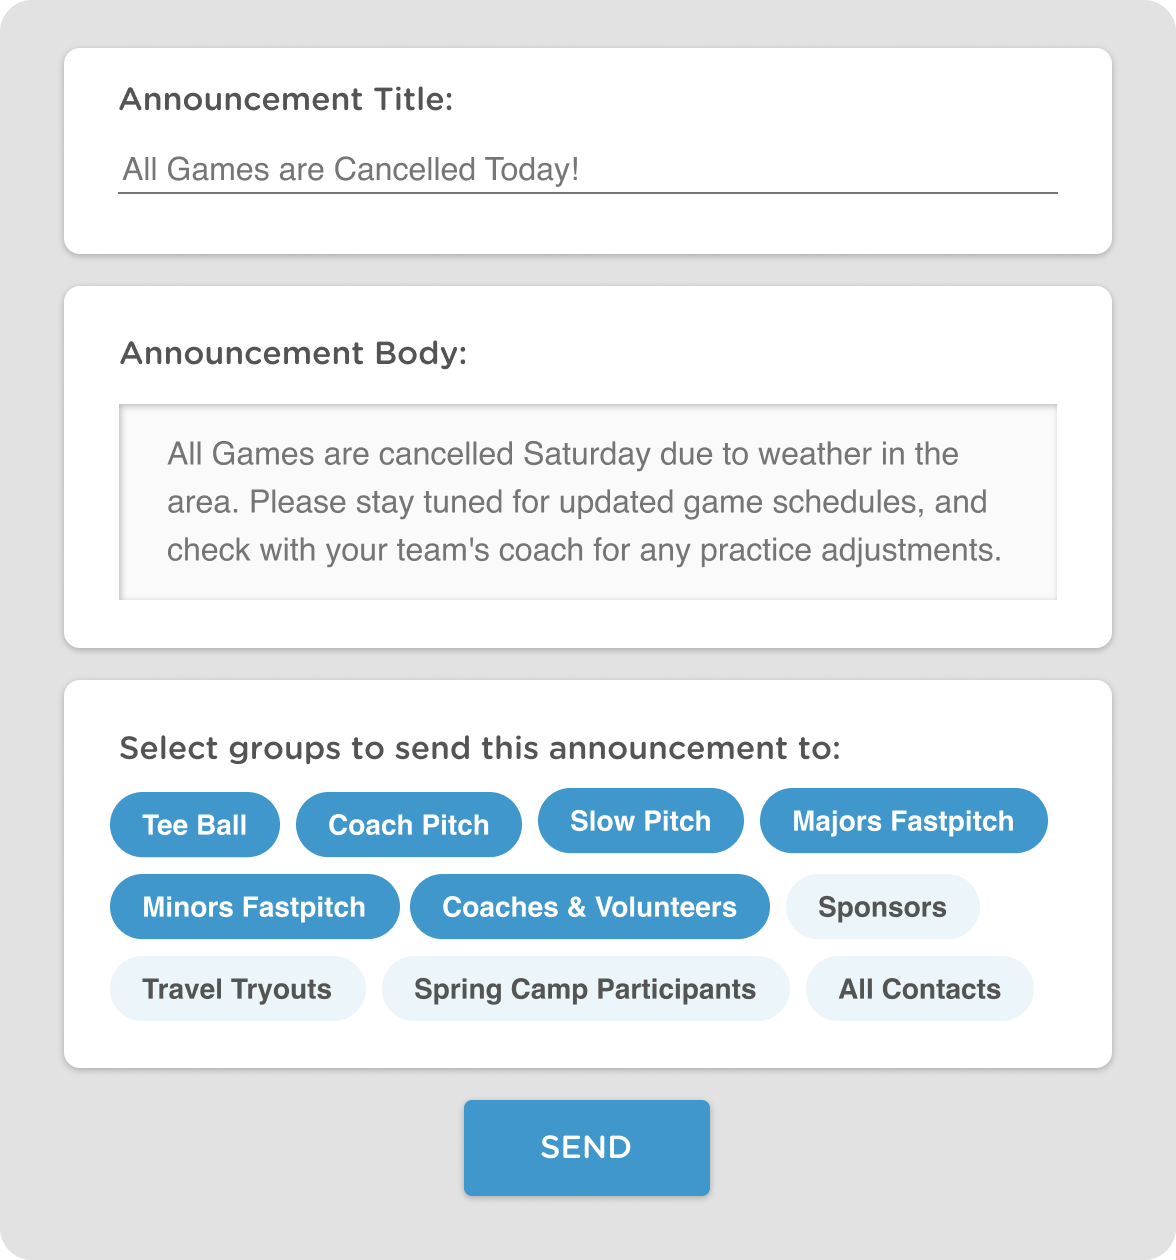 email and texting communication tools for softball teams, clubs, and leagues